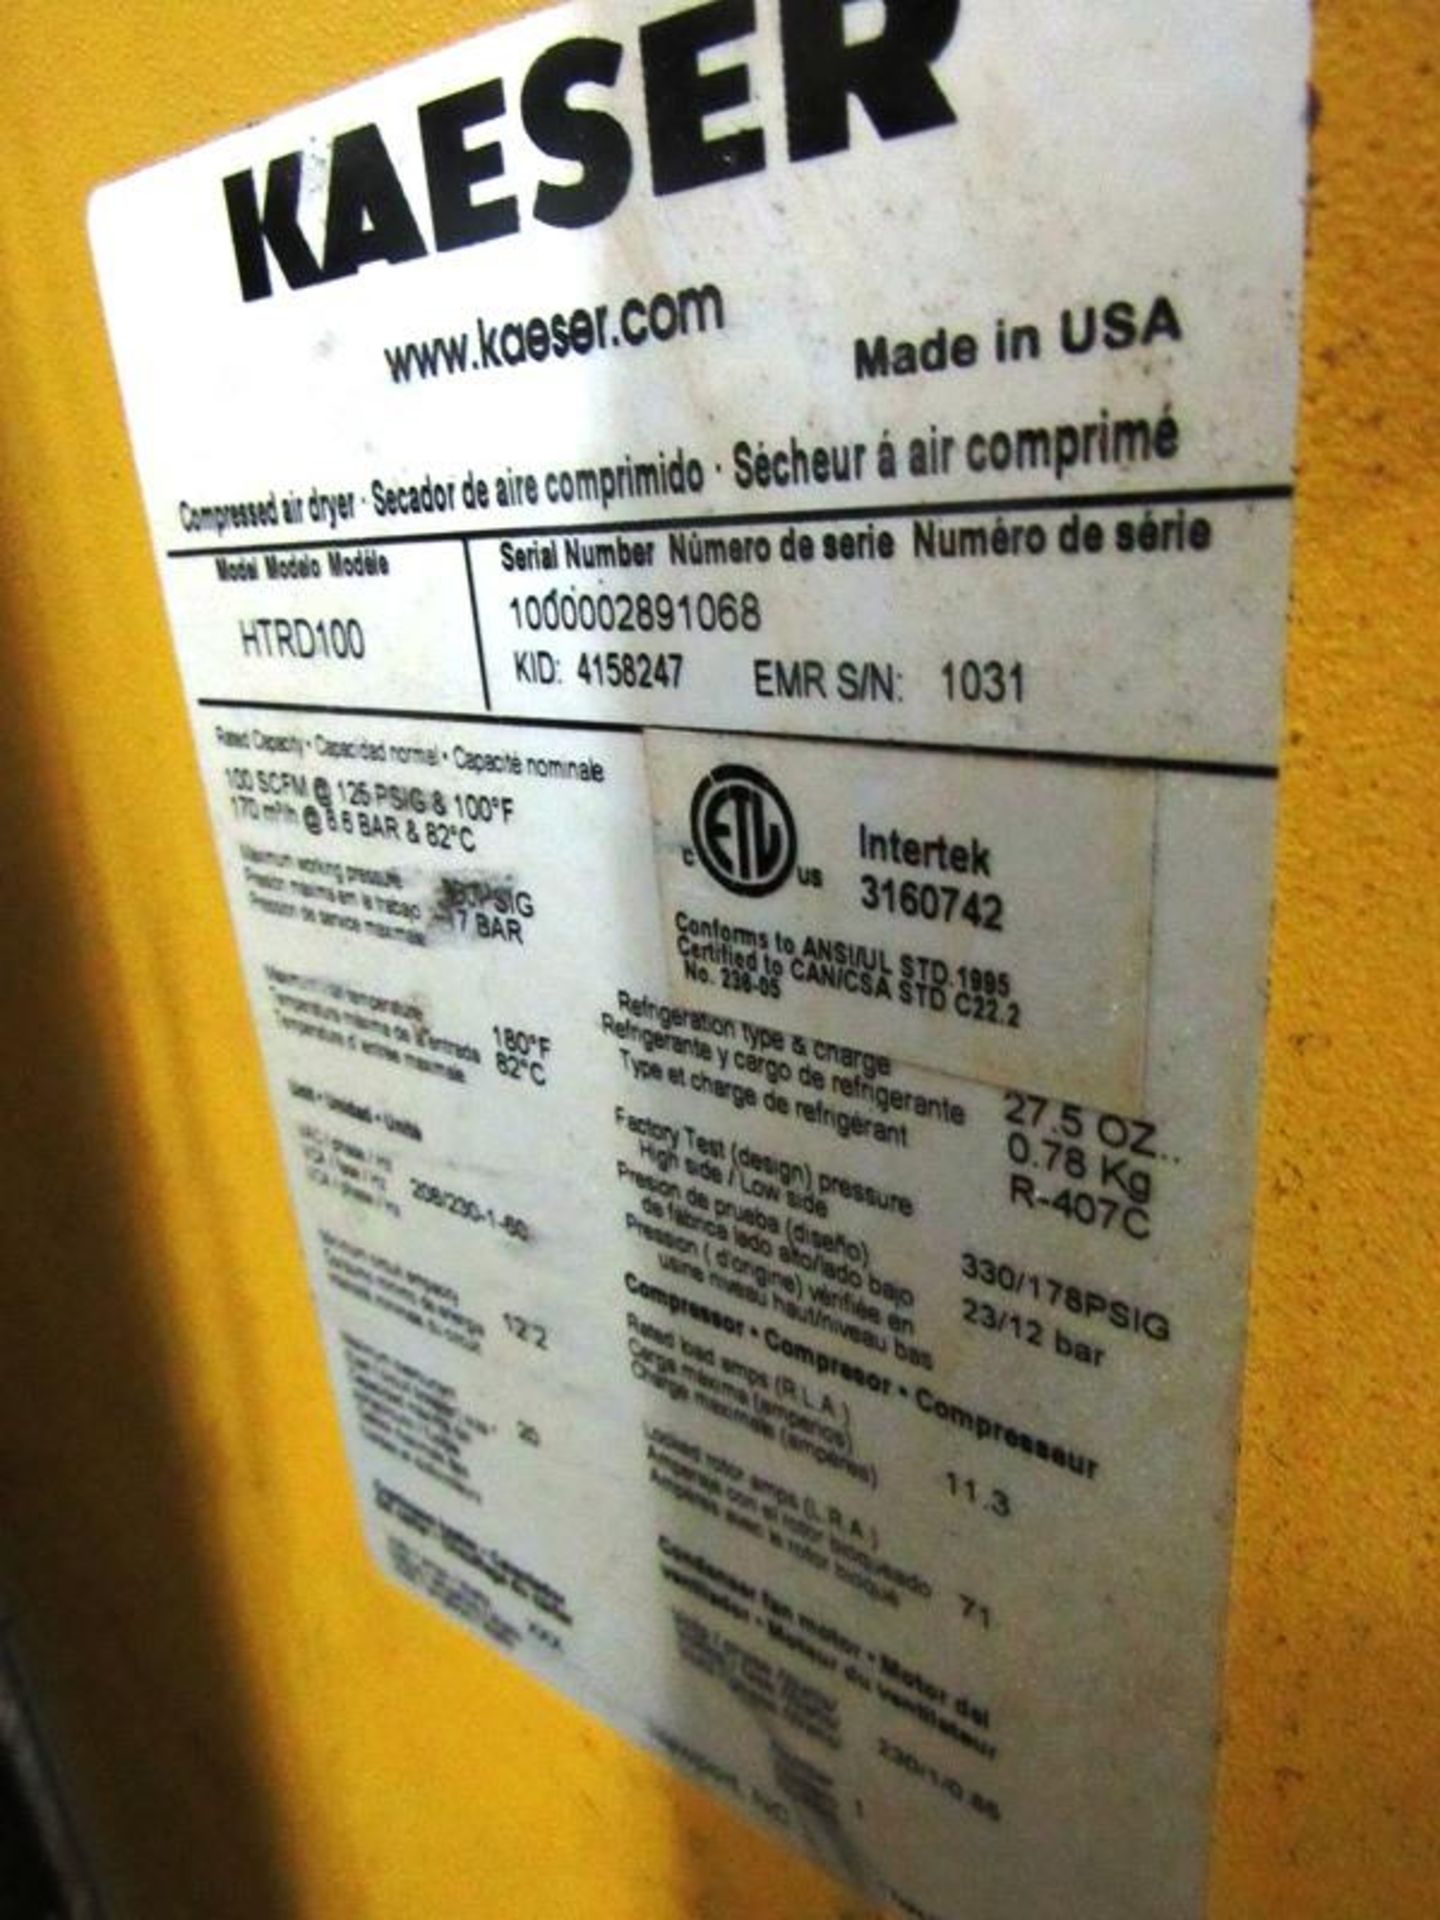 Kaeser Mdl. HTRD100 Refrigerated Air Dryer - Image 4 of 4